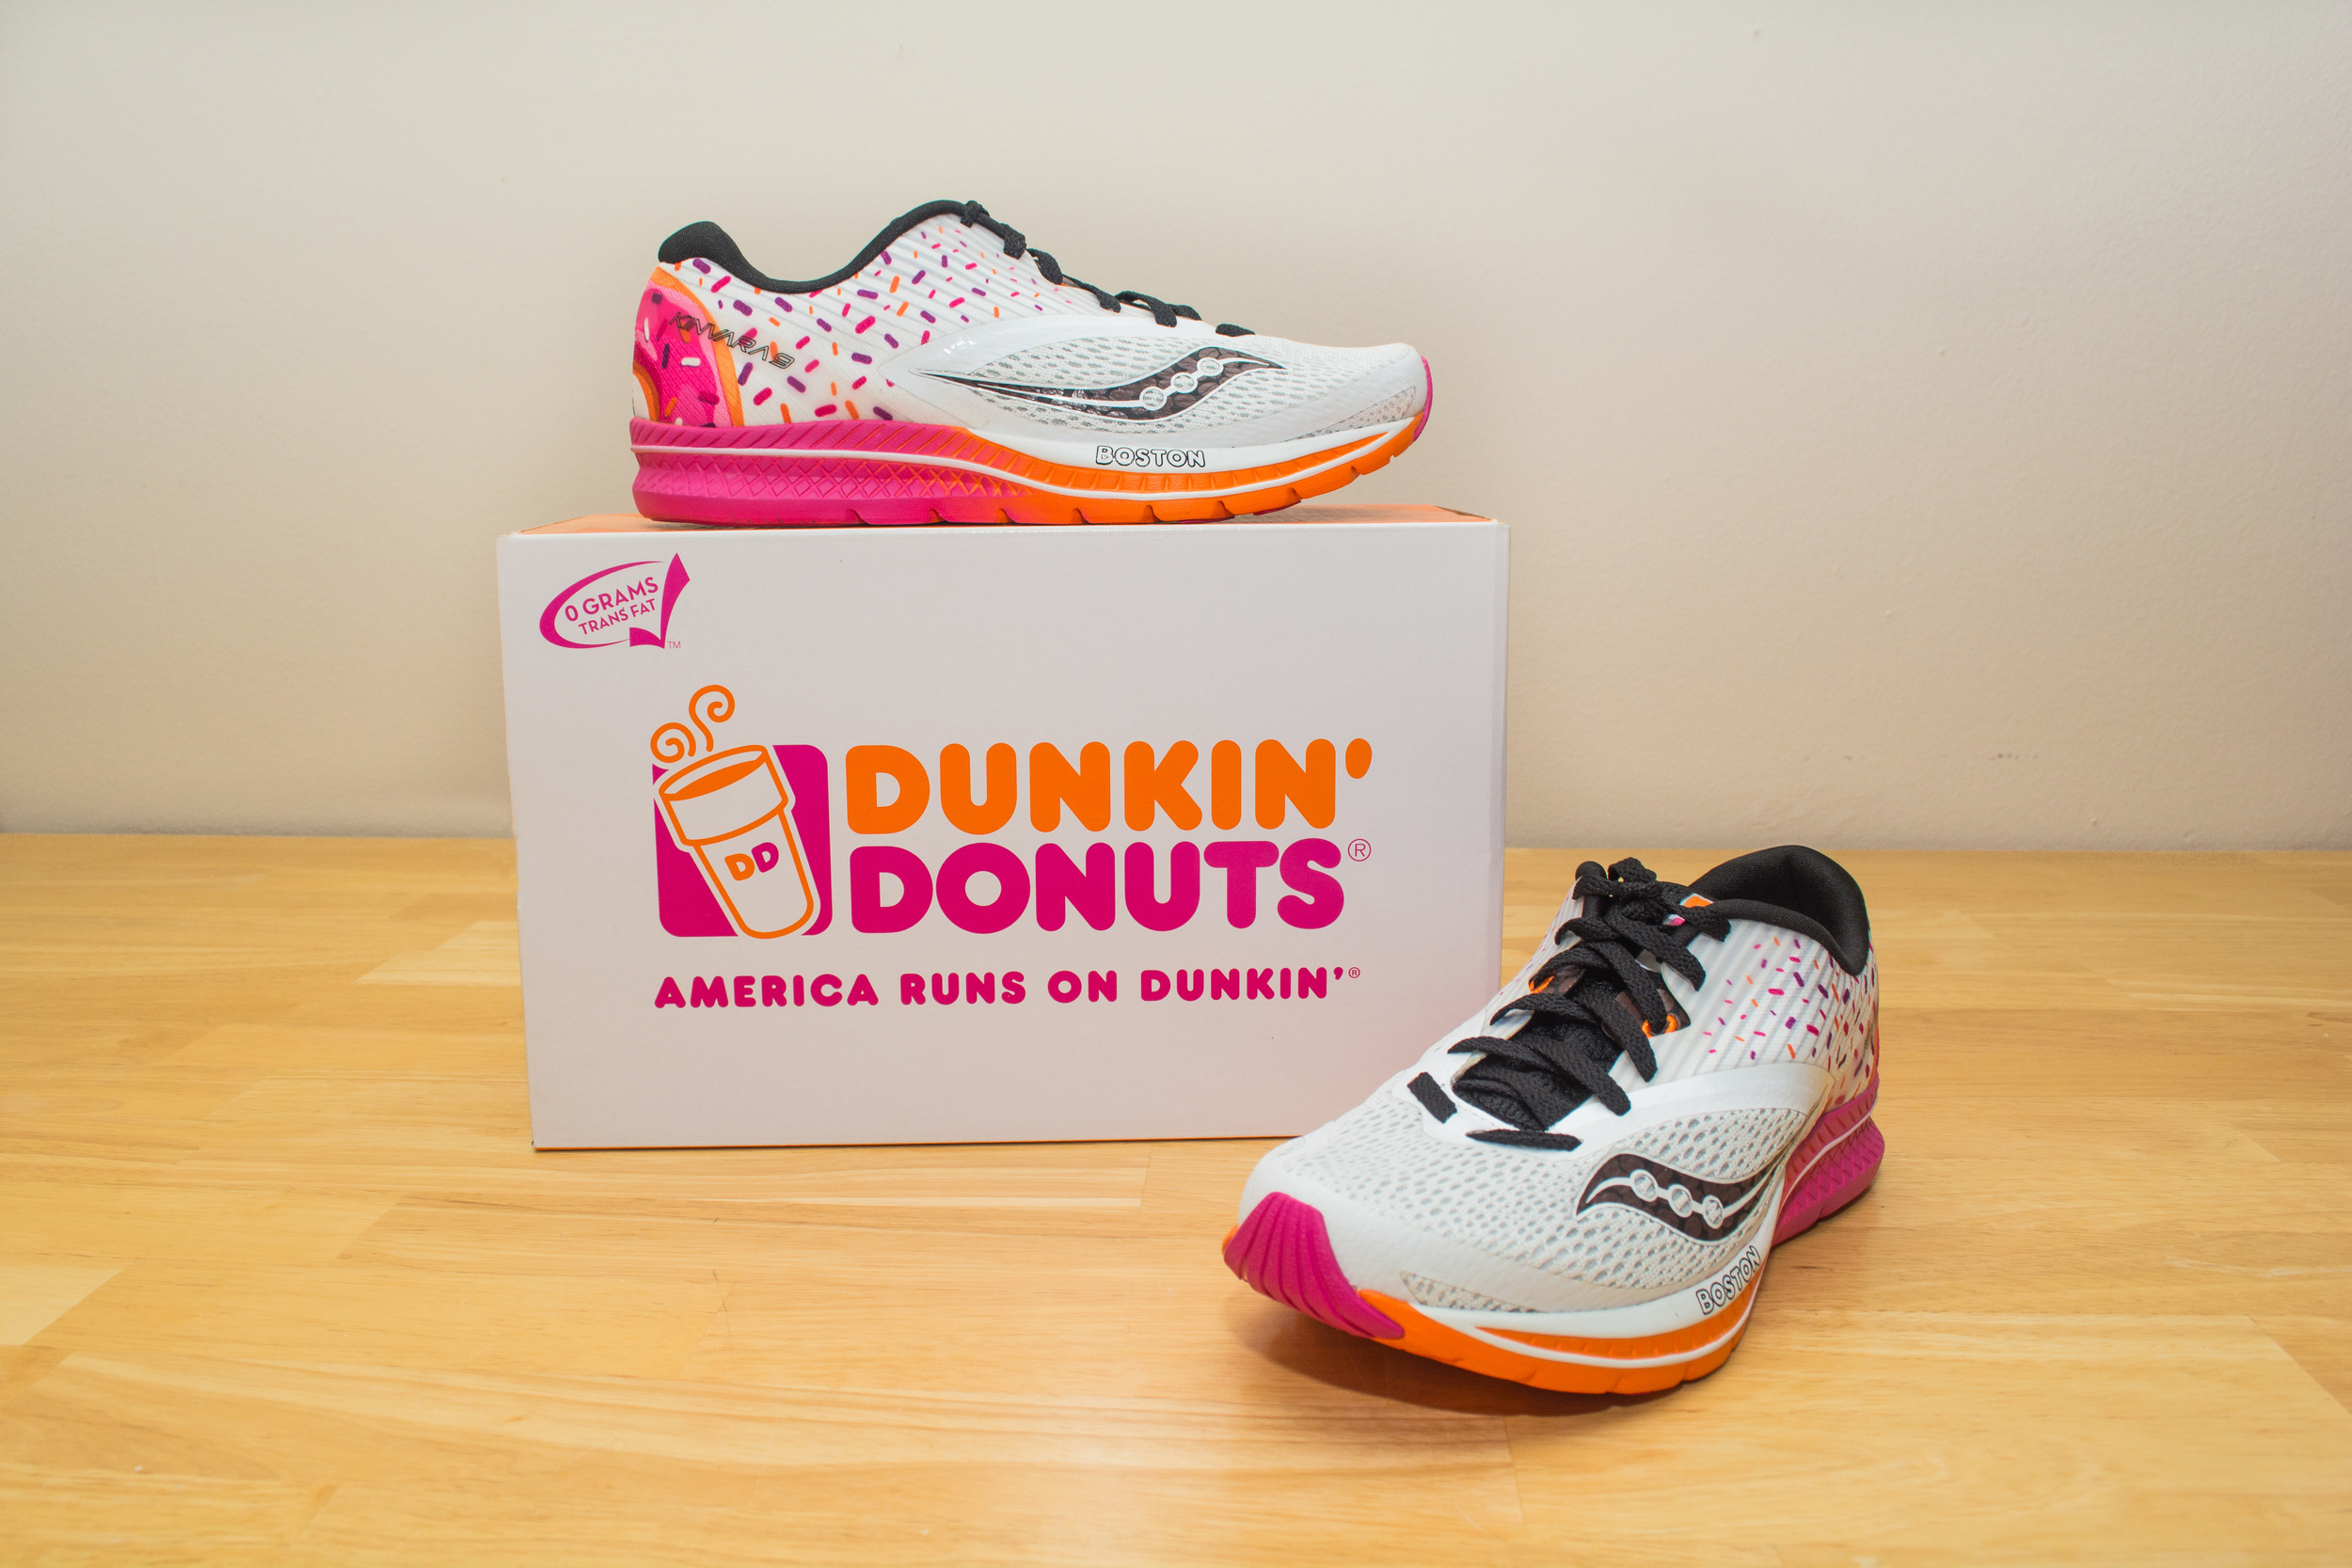 <p>In honor of the 122nd Boston Marathon in March 2018, Dunkin’ teamed with Massachusetts-based shoe designer Saucony to release a limited-edition sneaker. Not only did the Saucony x Dunkin' Kinvara 9 feature a strawberry-frosted aesthetic complete with rainbow sprinkles, but it came in a donut box-themed Dunkin’ shoebox. </p><p><a href='https://www.msn.com/en-us/community/channel/vid-cj9pqbr0vn9in2b6ddcd8sfgpfq6x6utp44fssrv6mc2gtybw0us'>Follow us on MSN to see more of our exclusive lifestyle content.</a></p>